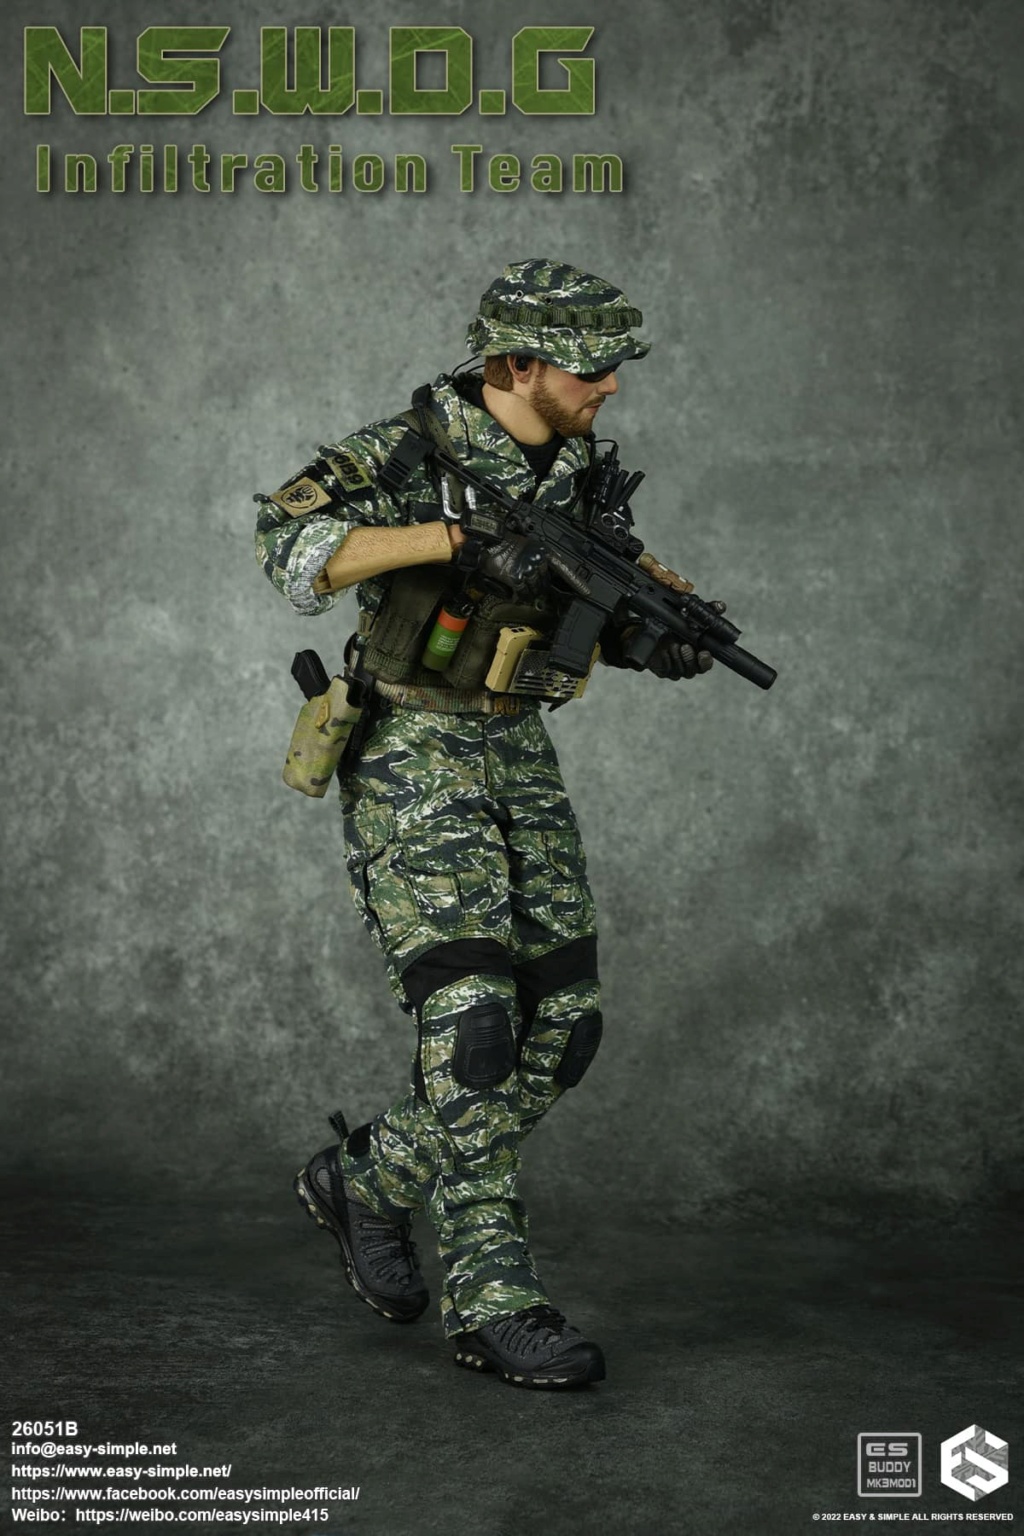 InfilitrationTeam - NEW PRODUCT: EASY AND SIMPLE 1/6 SCALE FIGURE: N.S.W.D.G INFILTRATION TEAM - (2 Versions) 9554